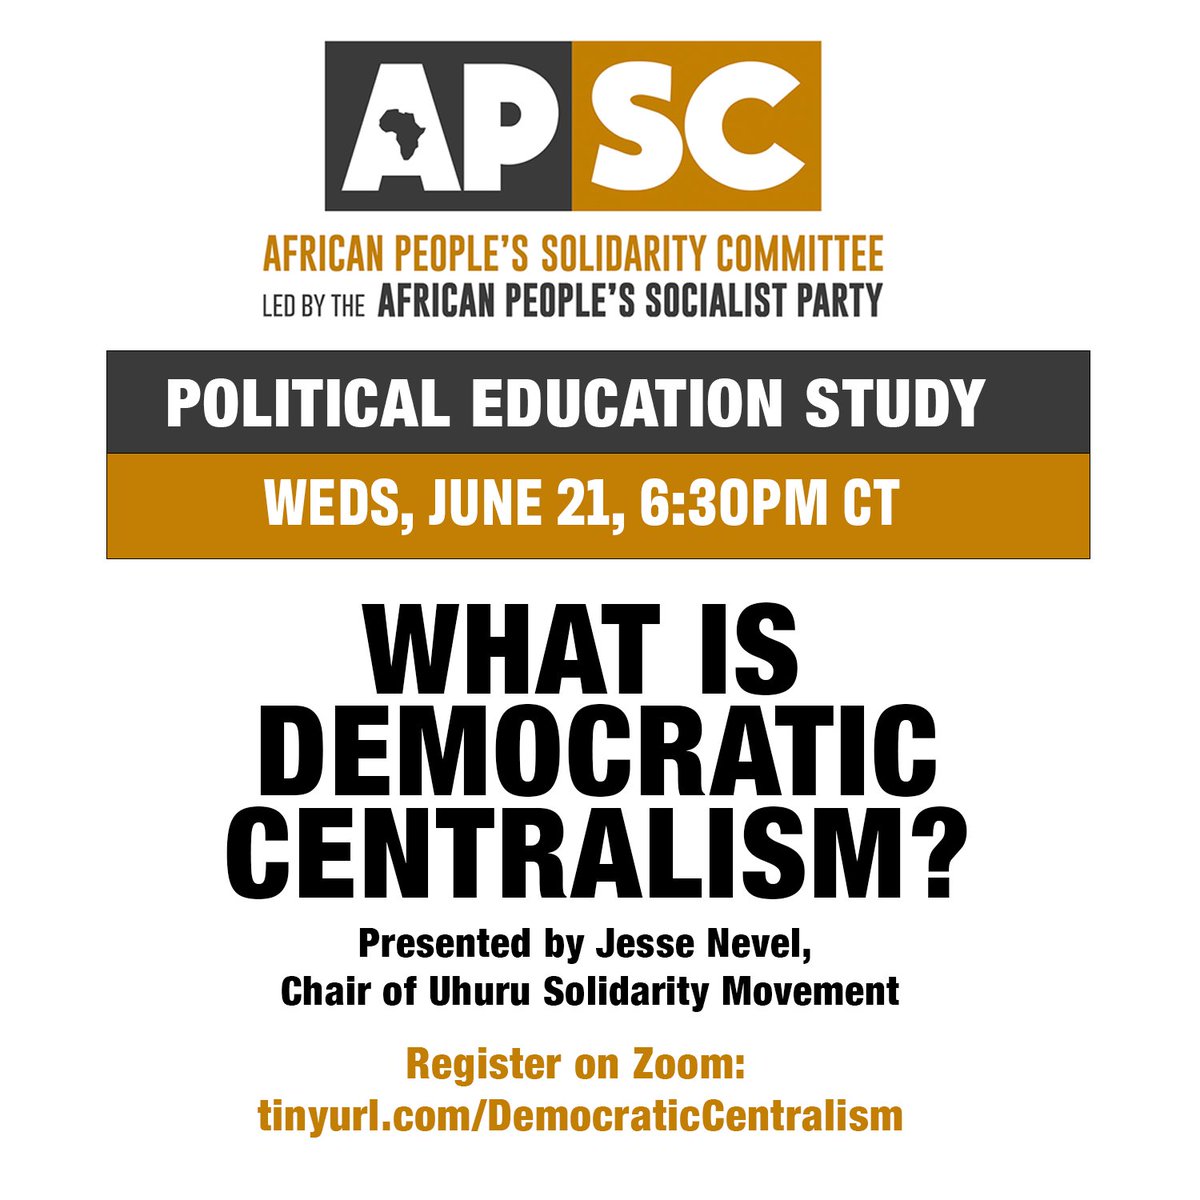 Join us this Wednesday, June 21st at 6:30pm CT/ 7:30pm ET for a political education study from the African People's Solidarity Committee, presented by Uhuru Solidarity Movement Chair Jesse Nevel.
Register at tinyurl.com/DemocraticCent… 
#APSC #PoliticalEducation